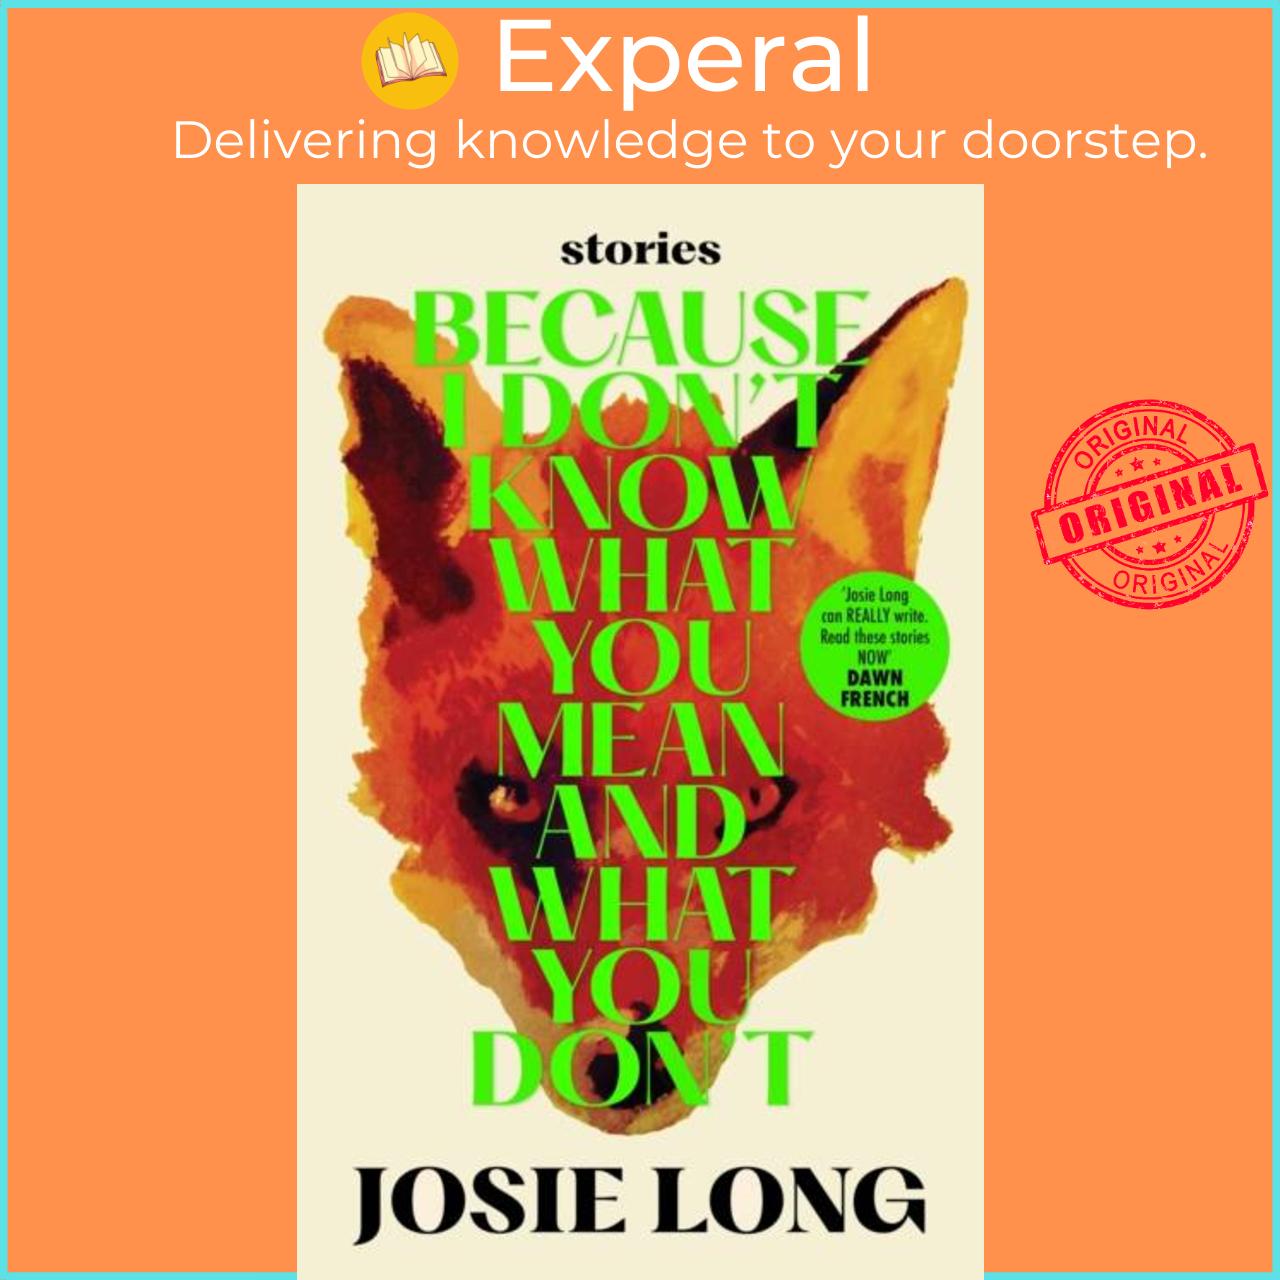 Sách - Because I don't know what you mean and what you don't by Josie Long (UK edition, hardcover)